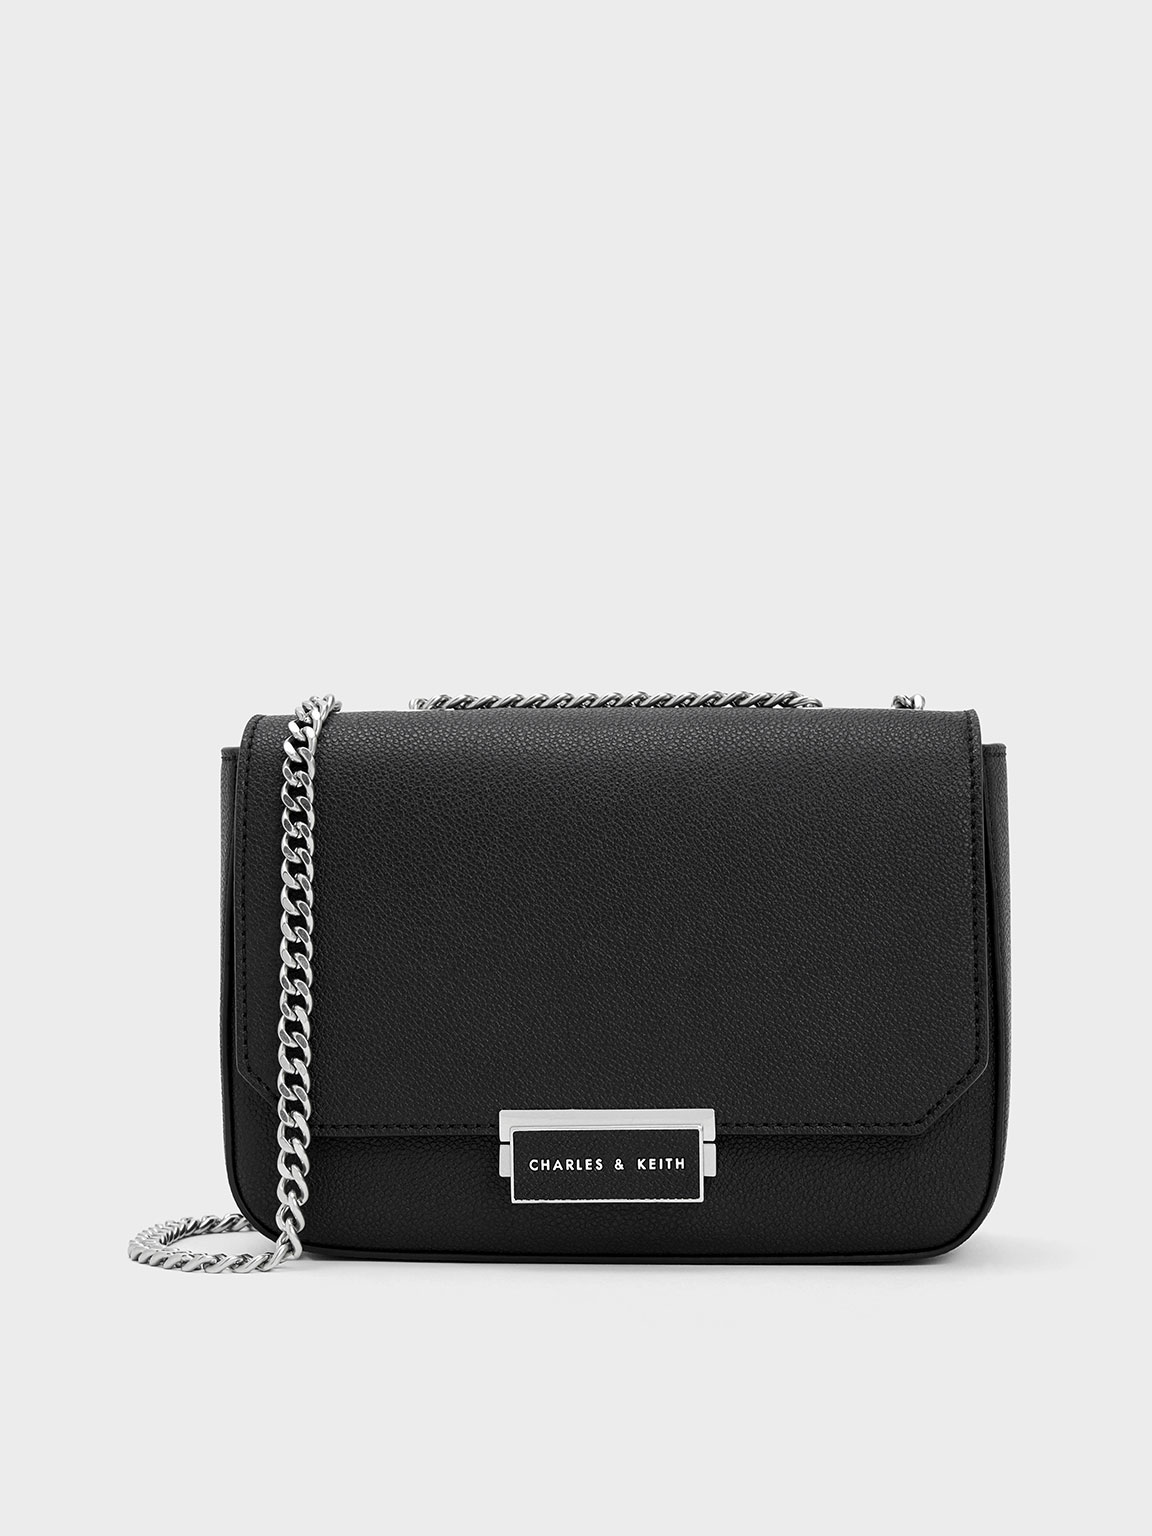 Chic and functional, the Philomena crossbody bag and Brielle wallet from  the CHARLES & KEITH x Singapore Airlines collection will make an… |  Instagram